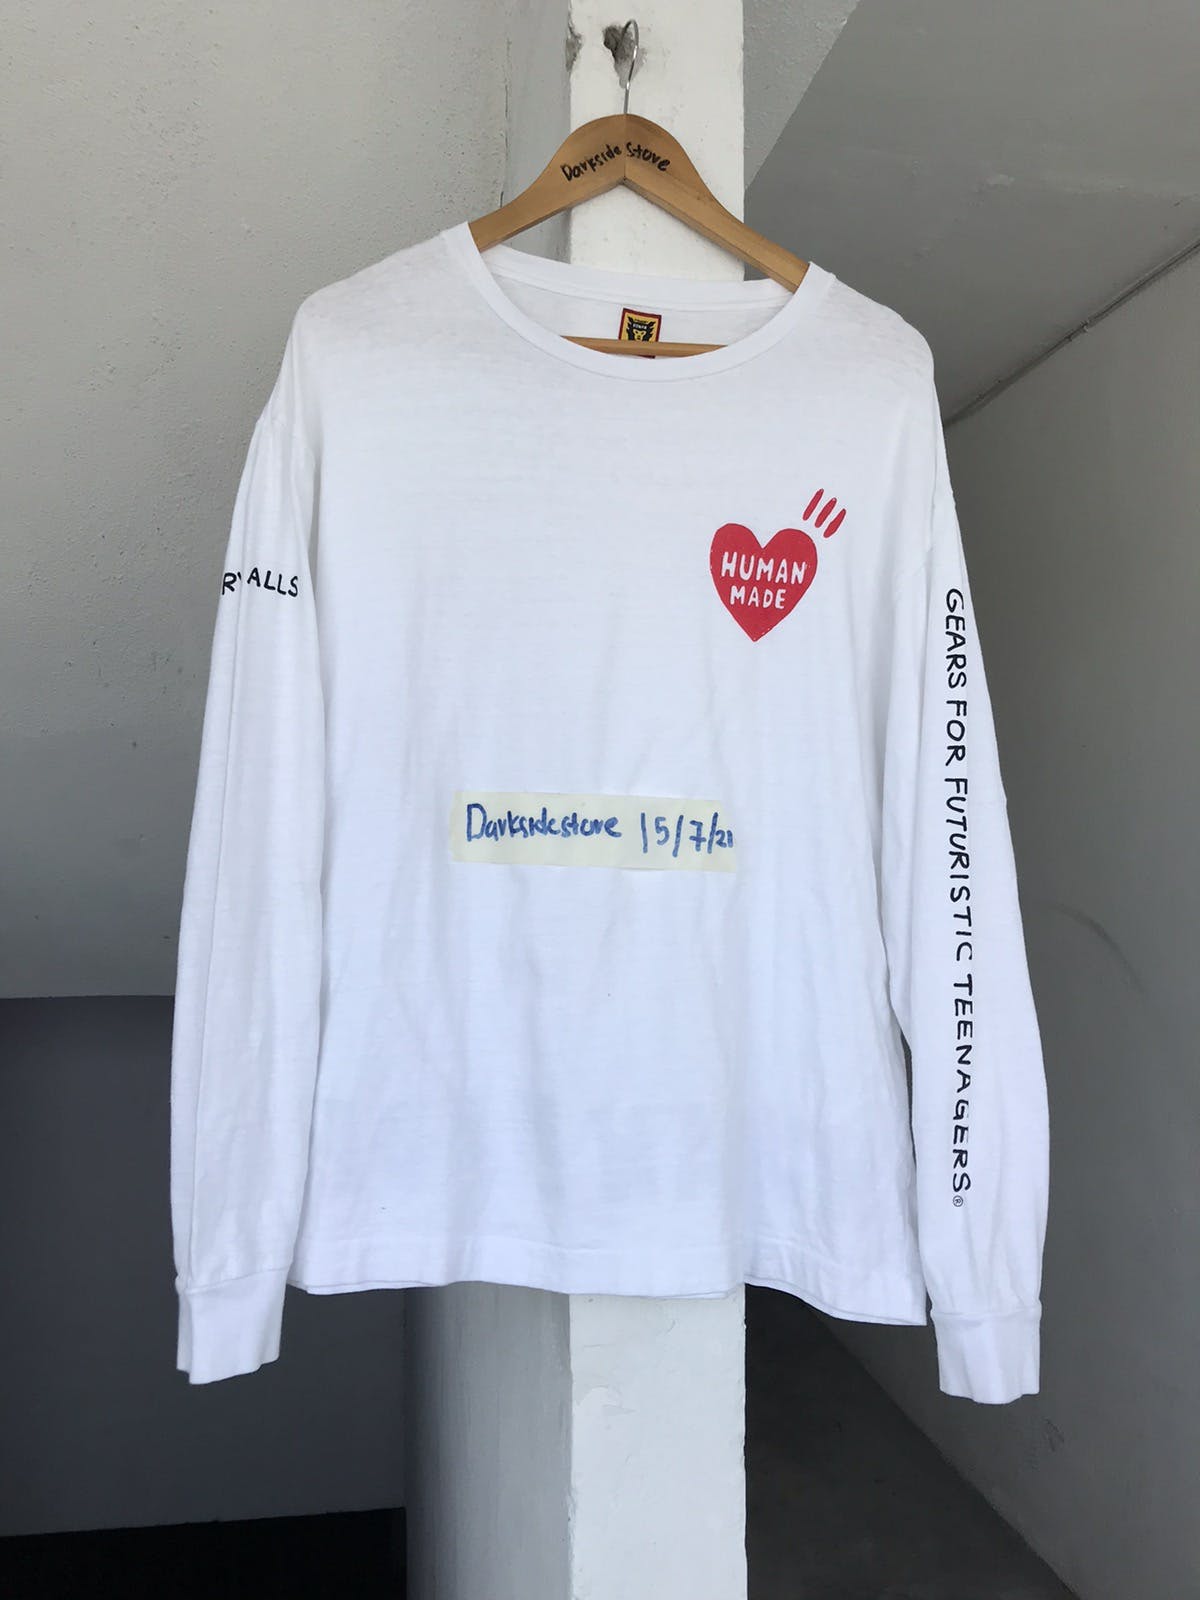 HumanMade Dry all Long Sleeve - 6